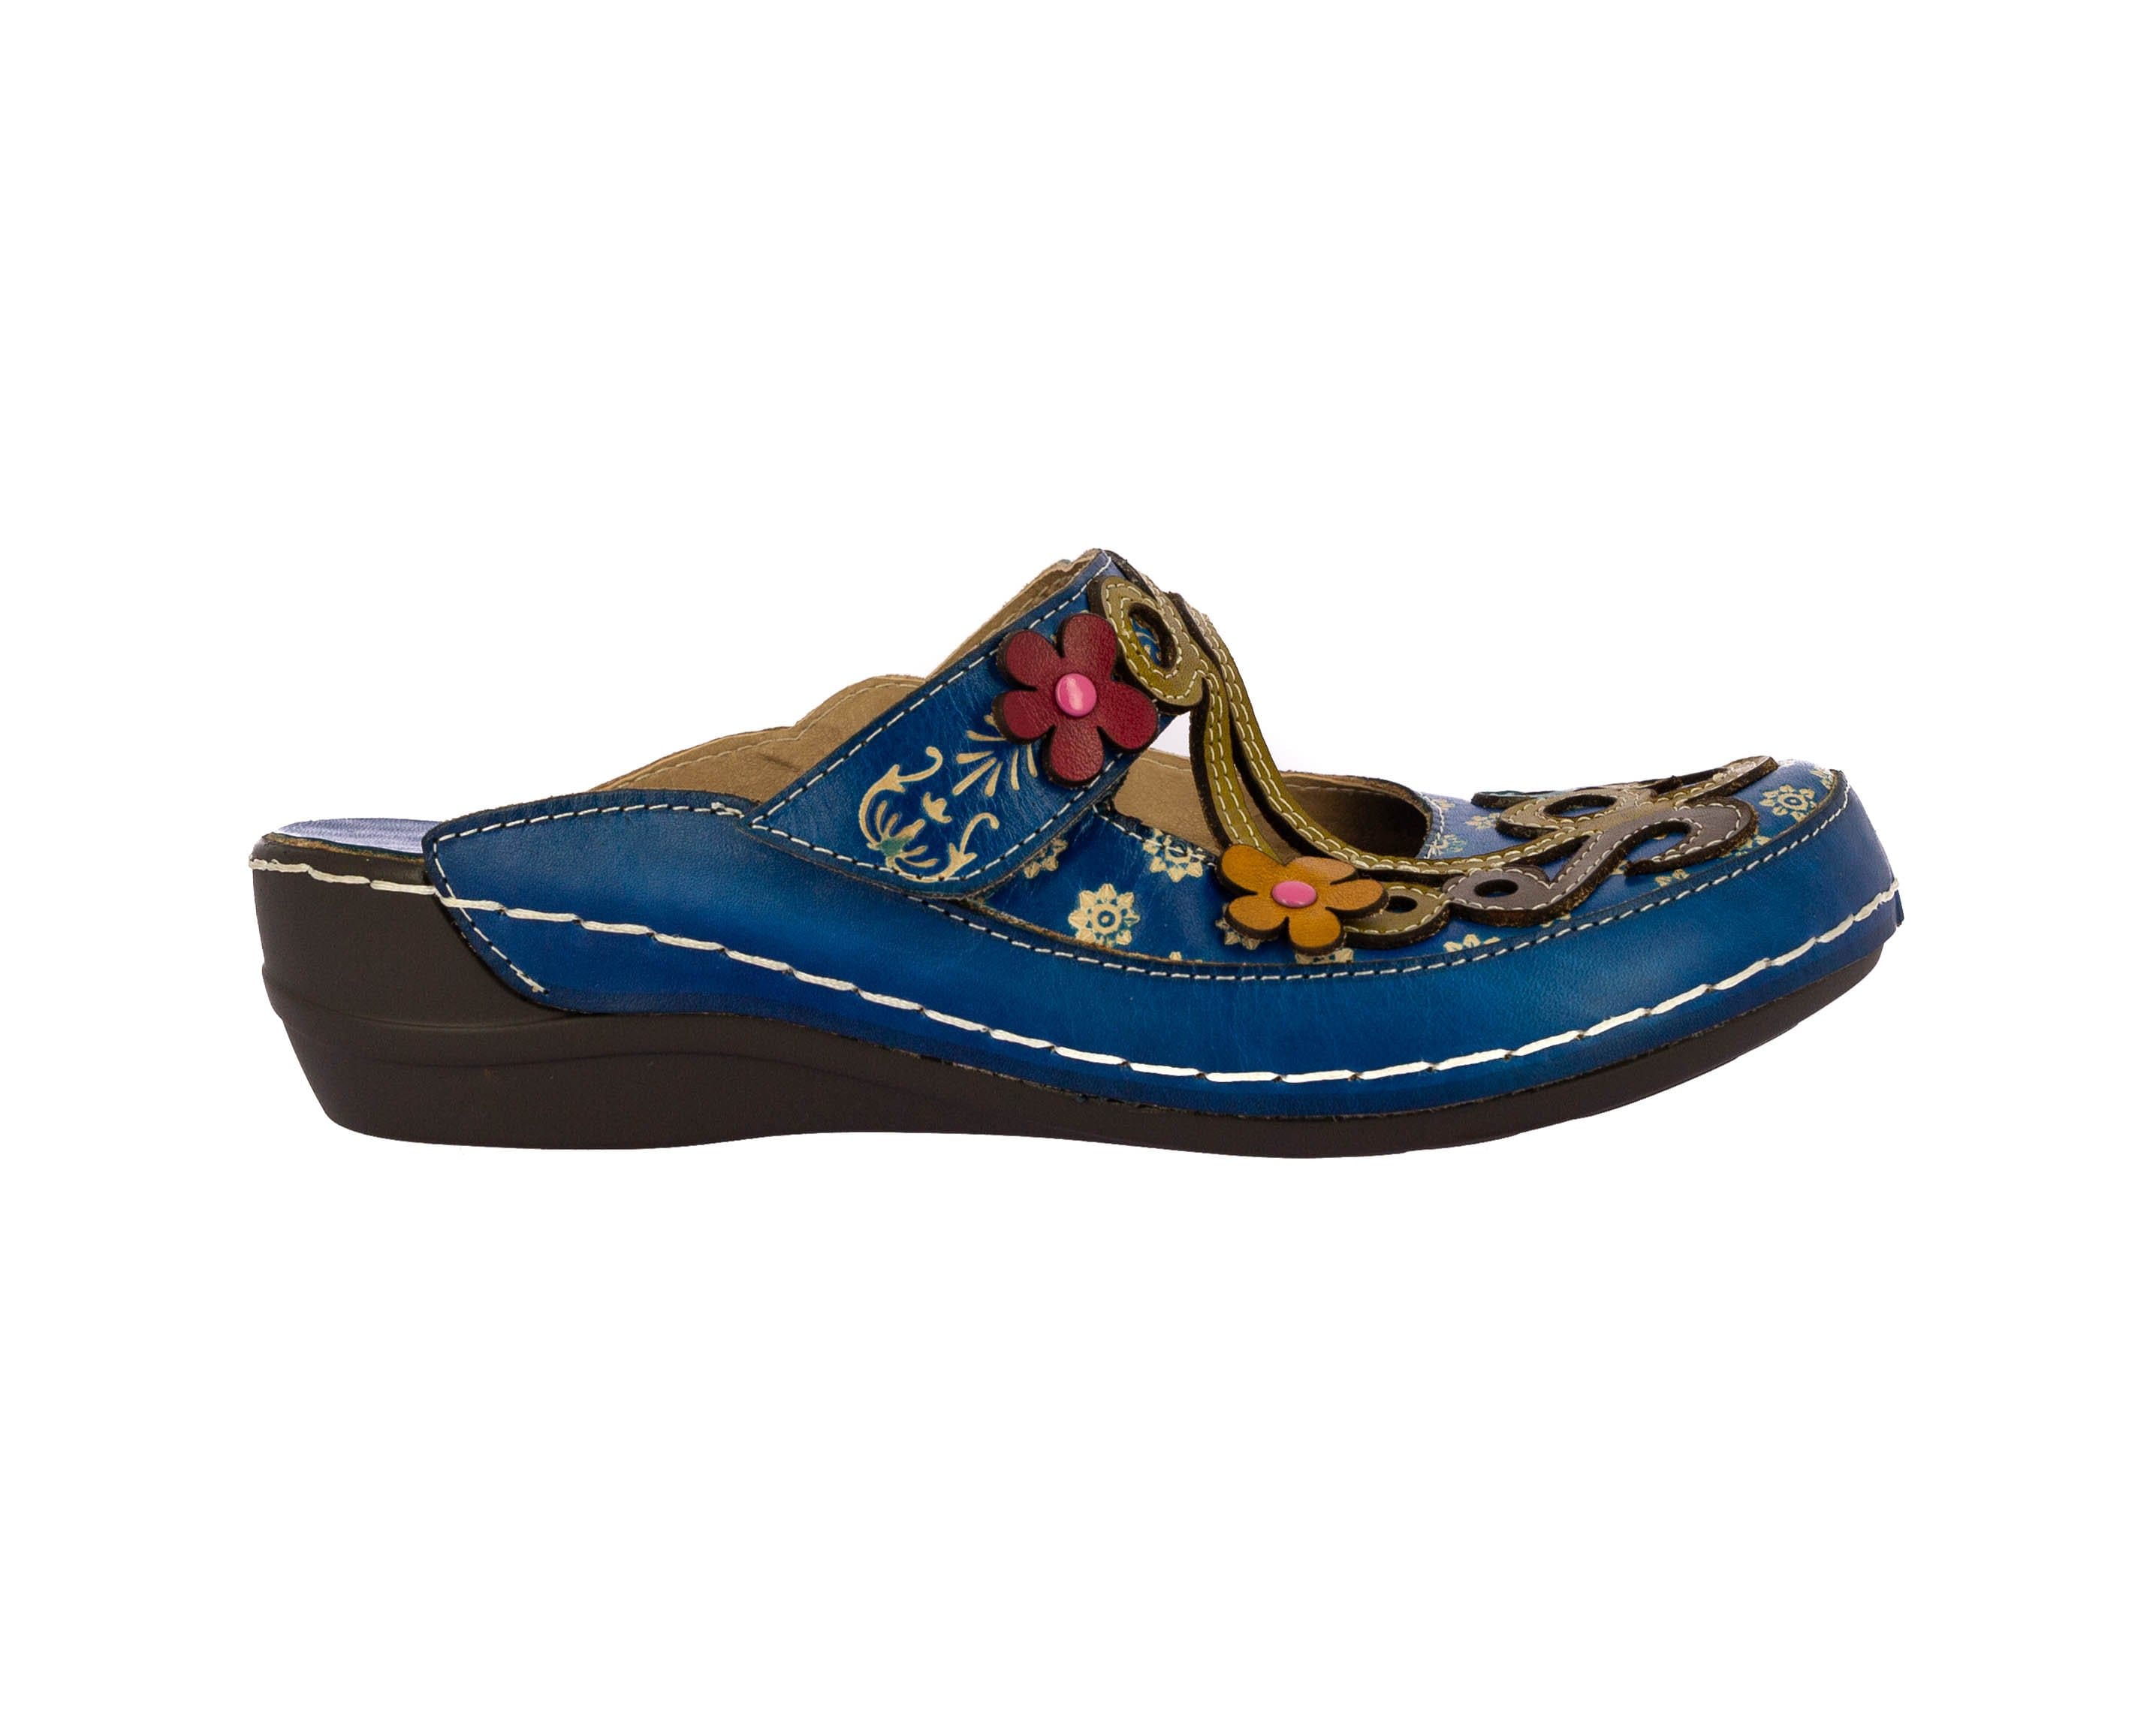 HECTO 08 - 35 / TURQUOISE shoes - Mulle